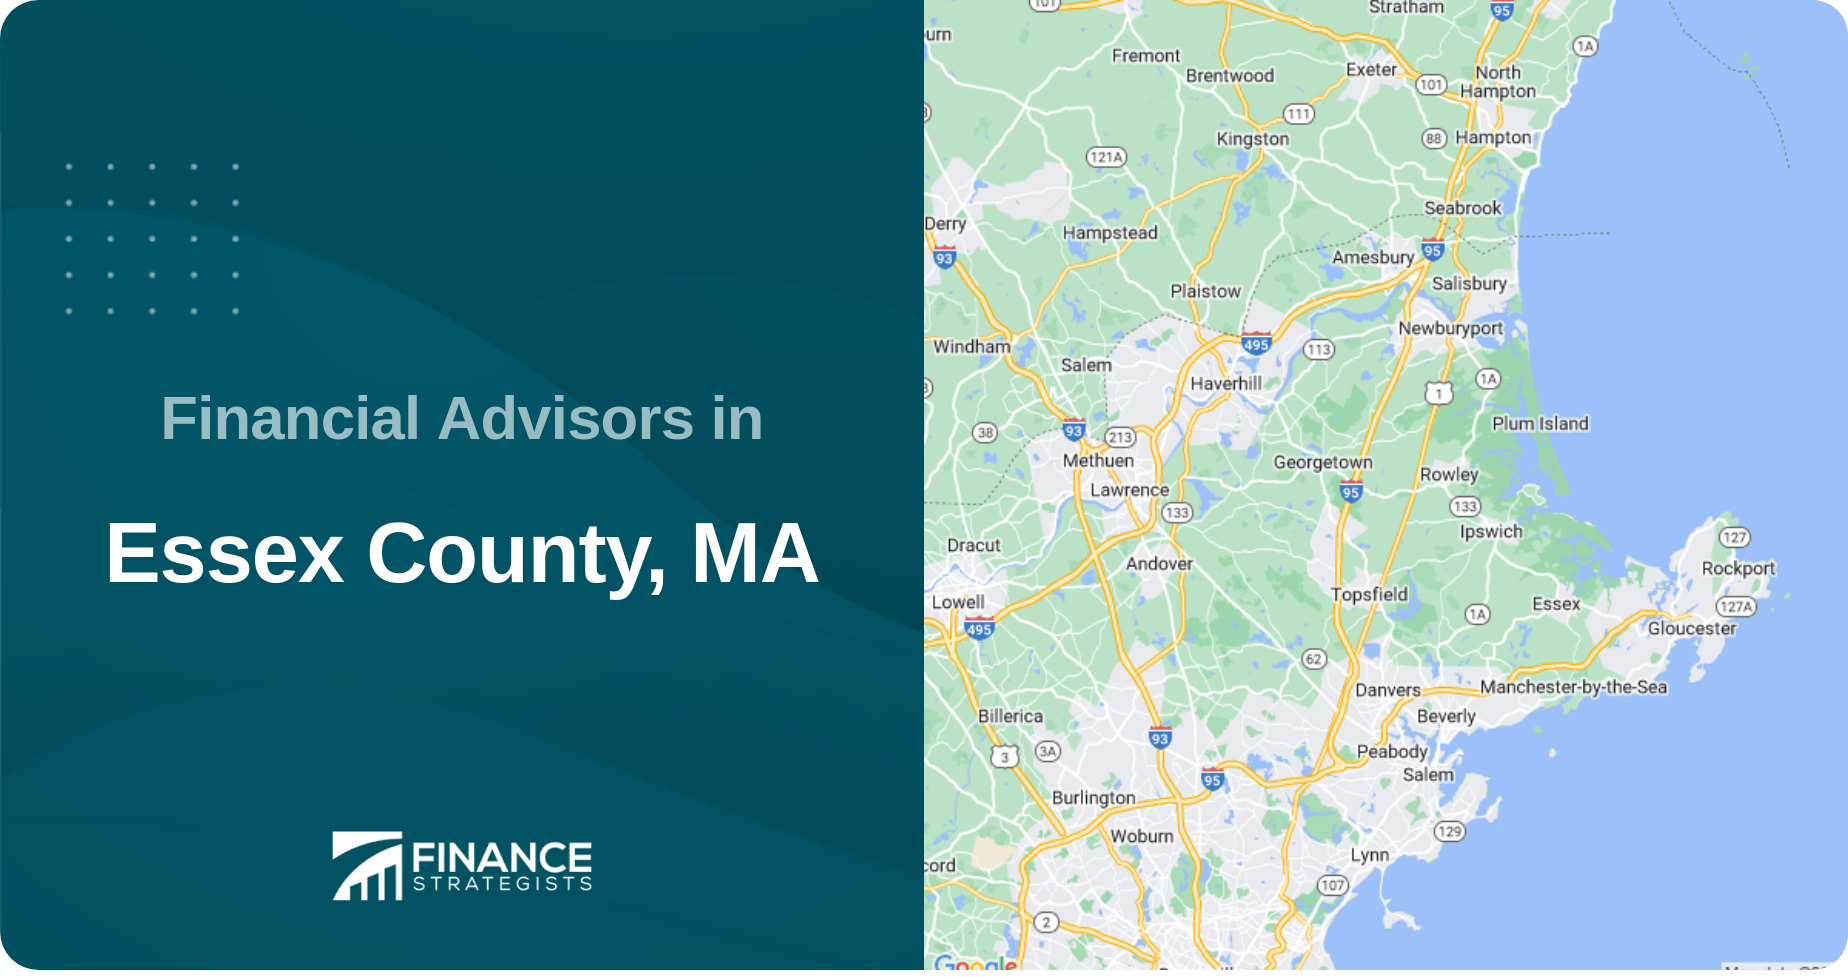 Financial Advisors in Essex County, MA